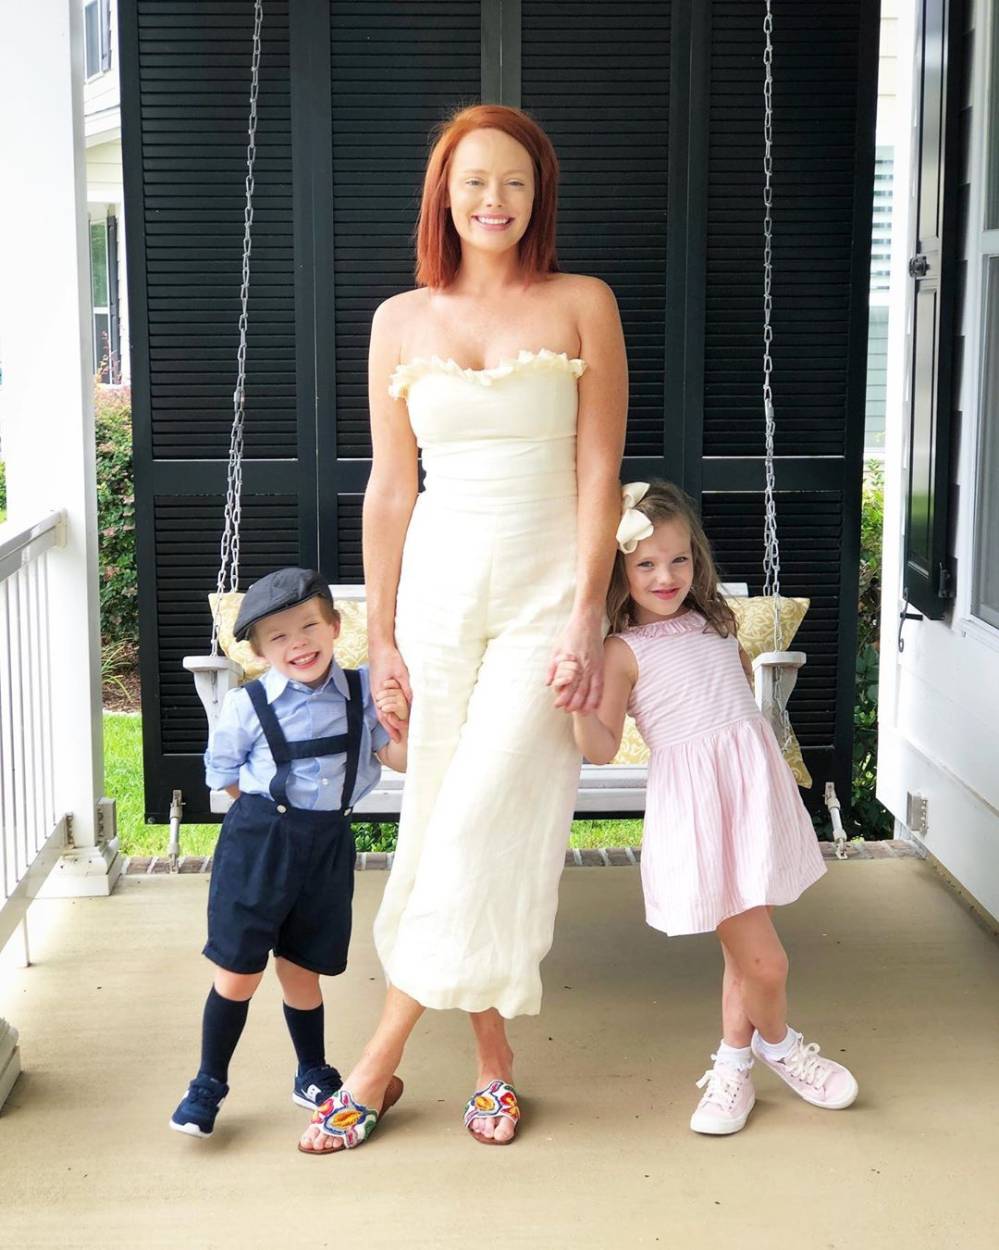 Southern Charm Kathryn Dennis Poses With Kids After Getting Joint Custody